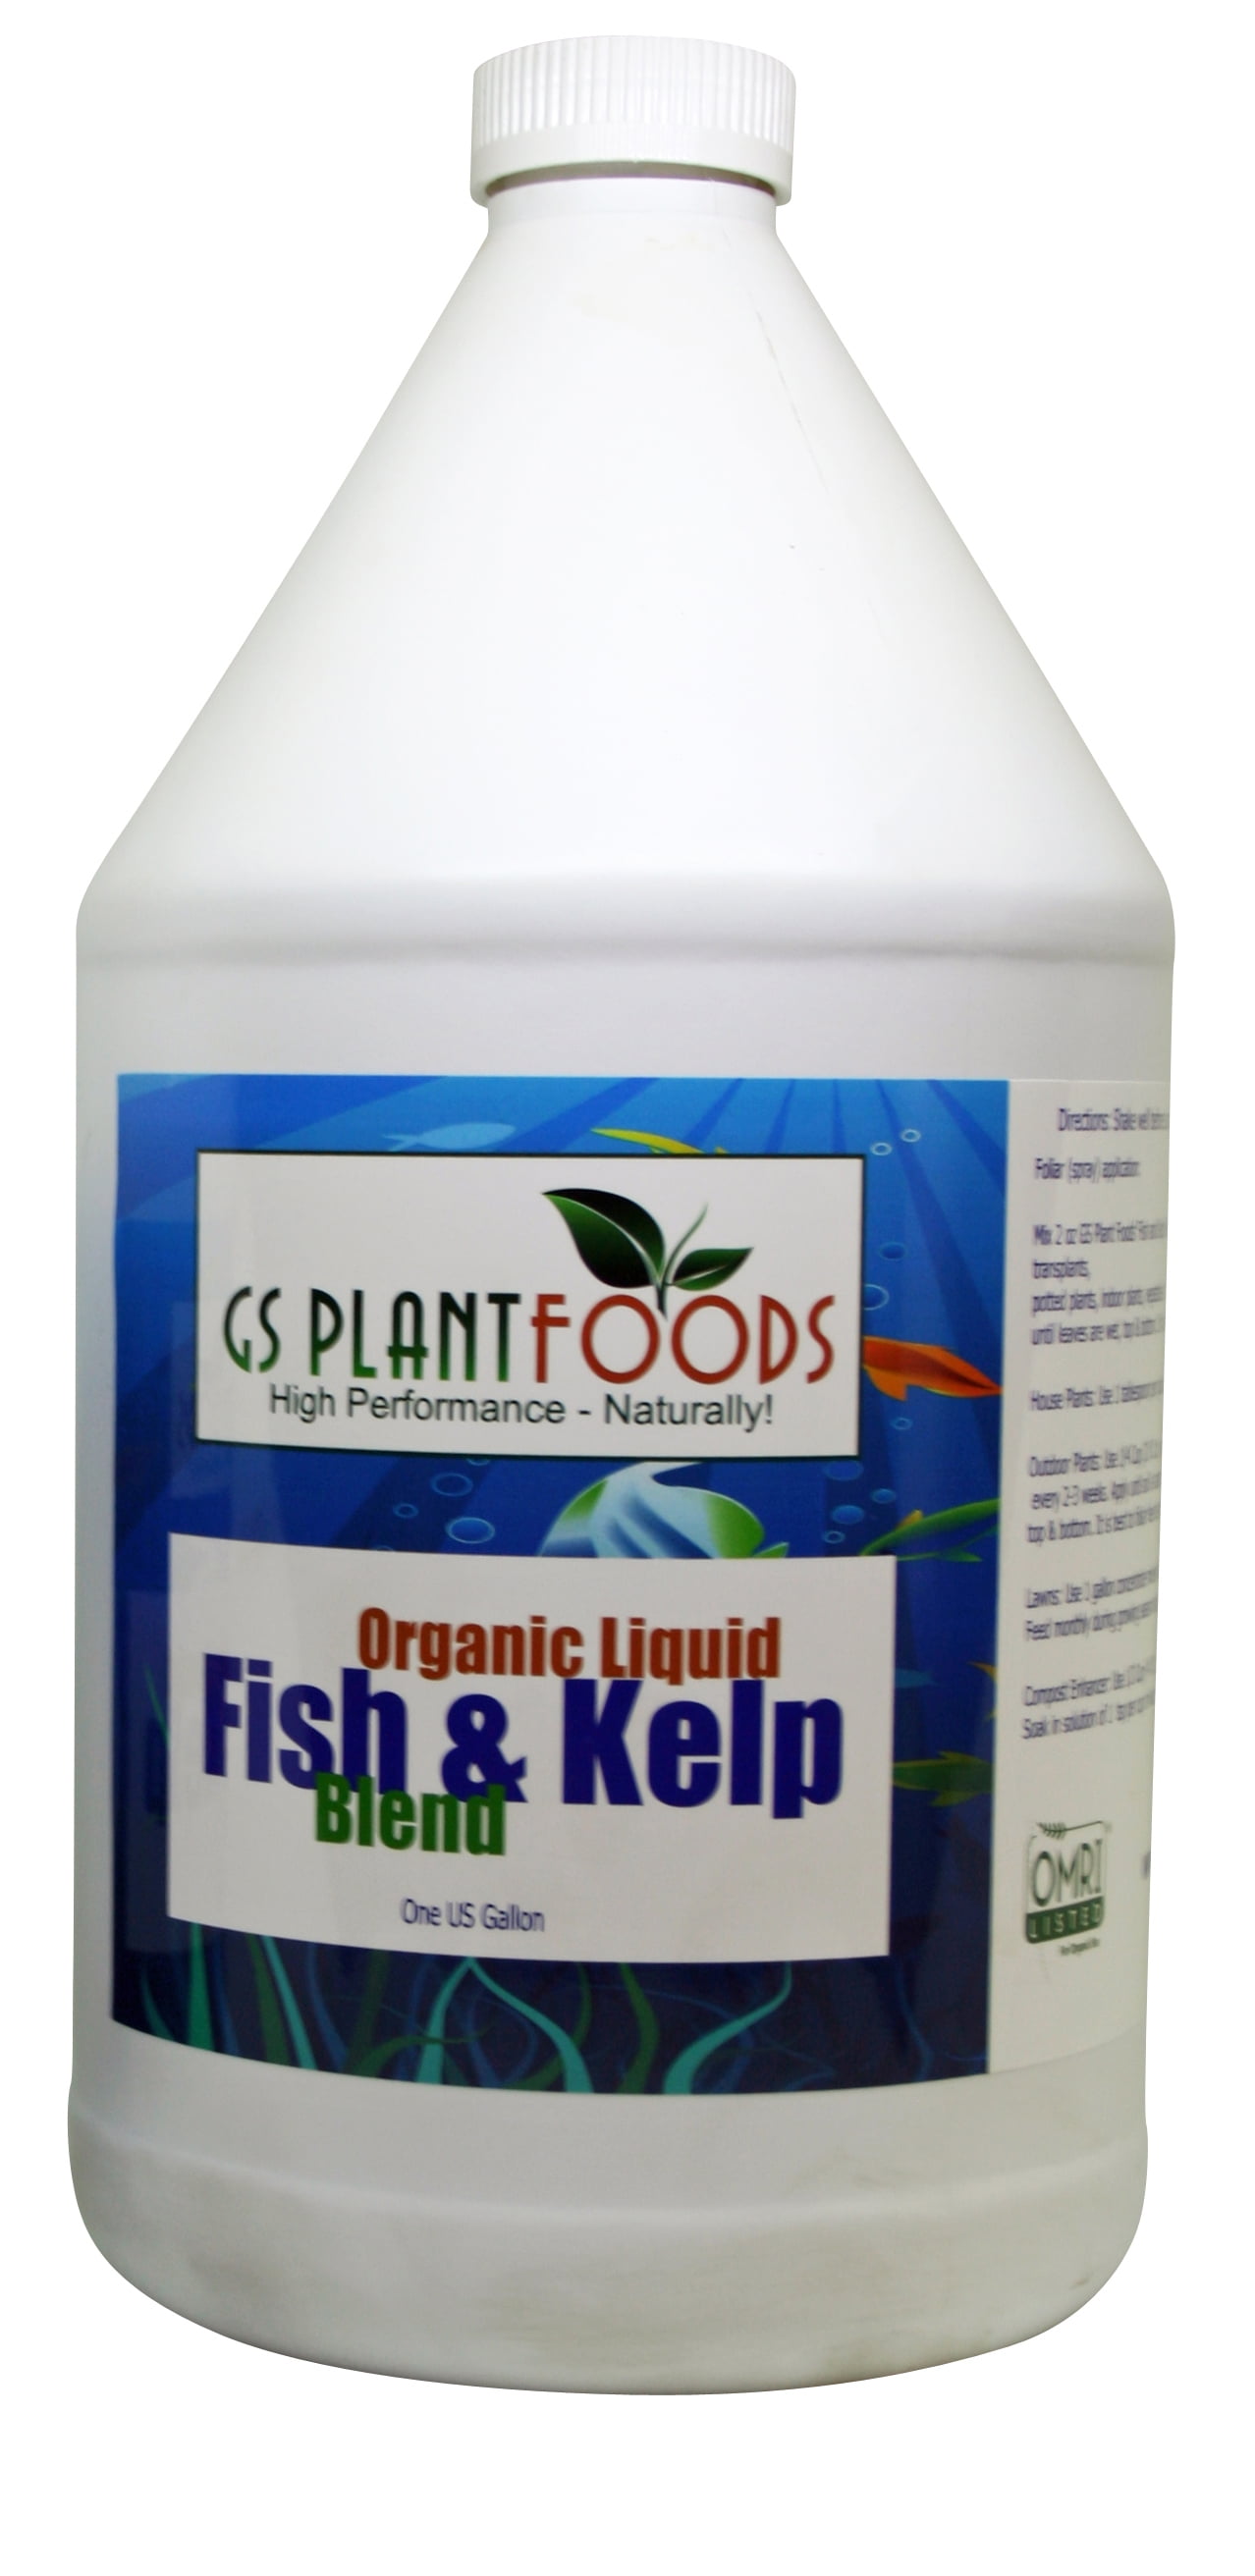 Image of Bag of kelp fertilizer being sold in a store